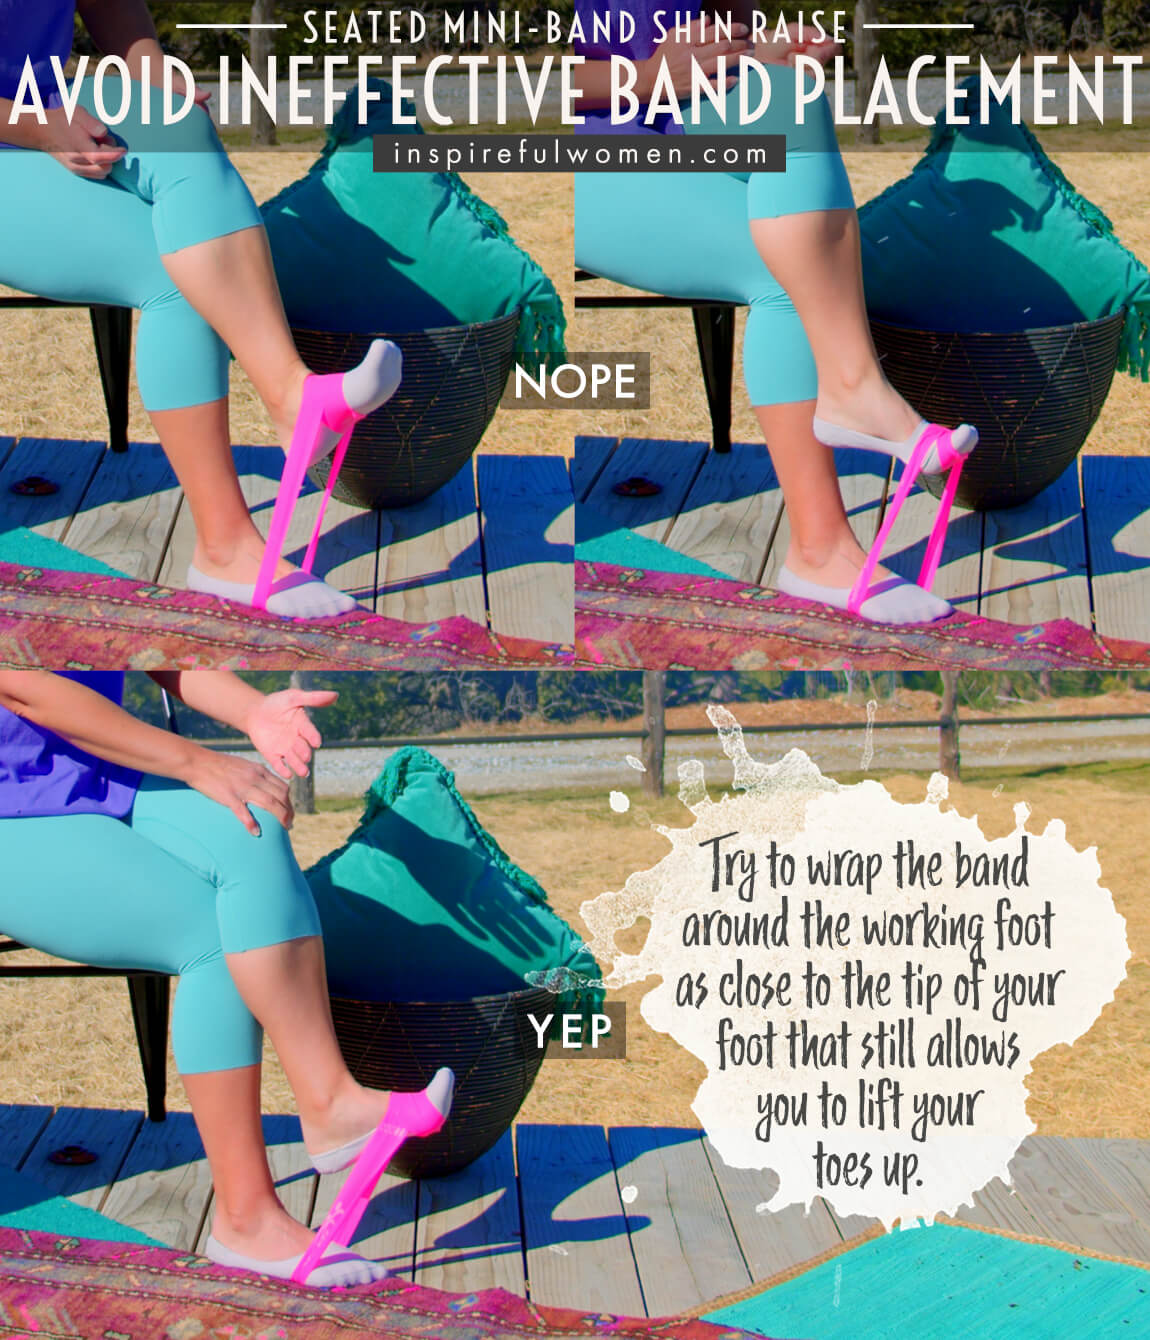 avoid-ineffective-band-placement-seated-mini-band-shin-raises-common-mistakes